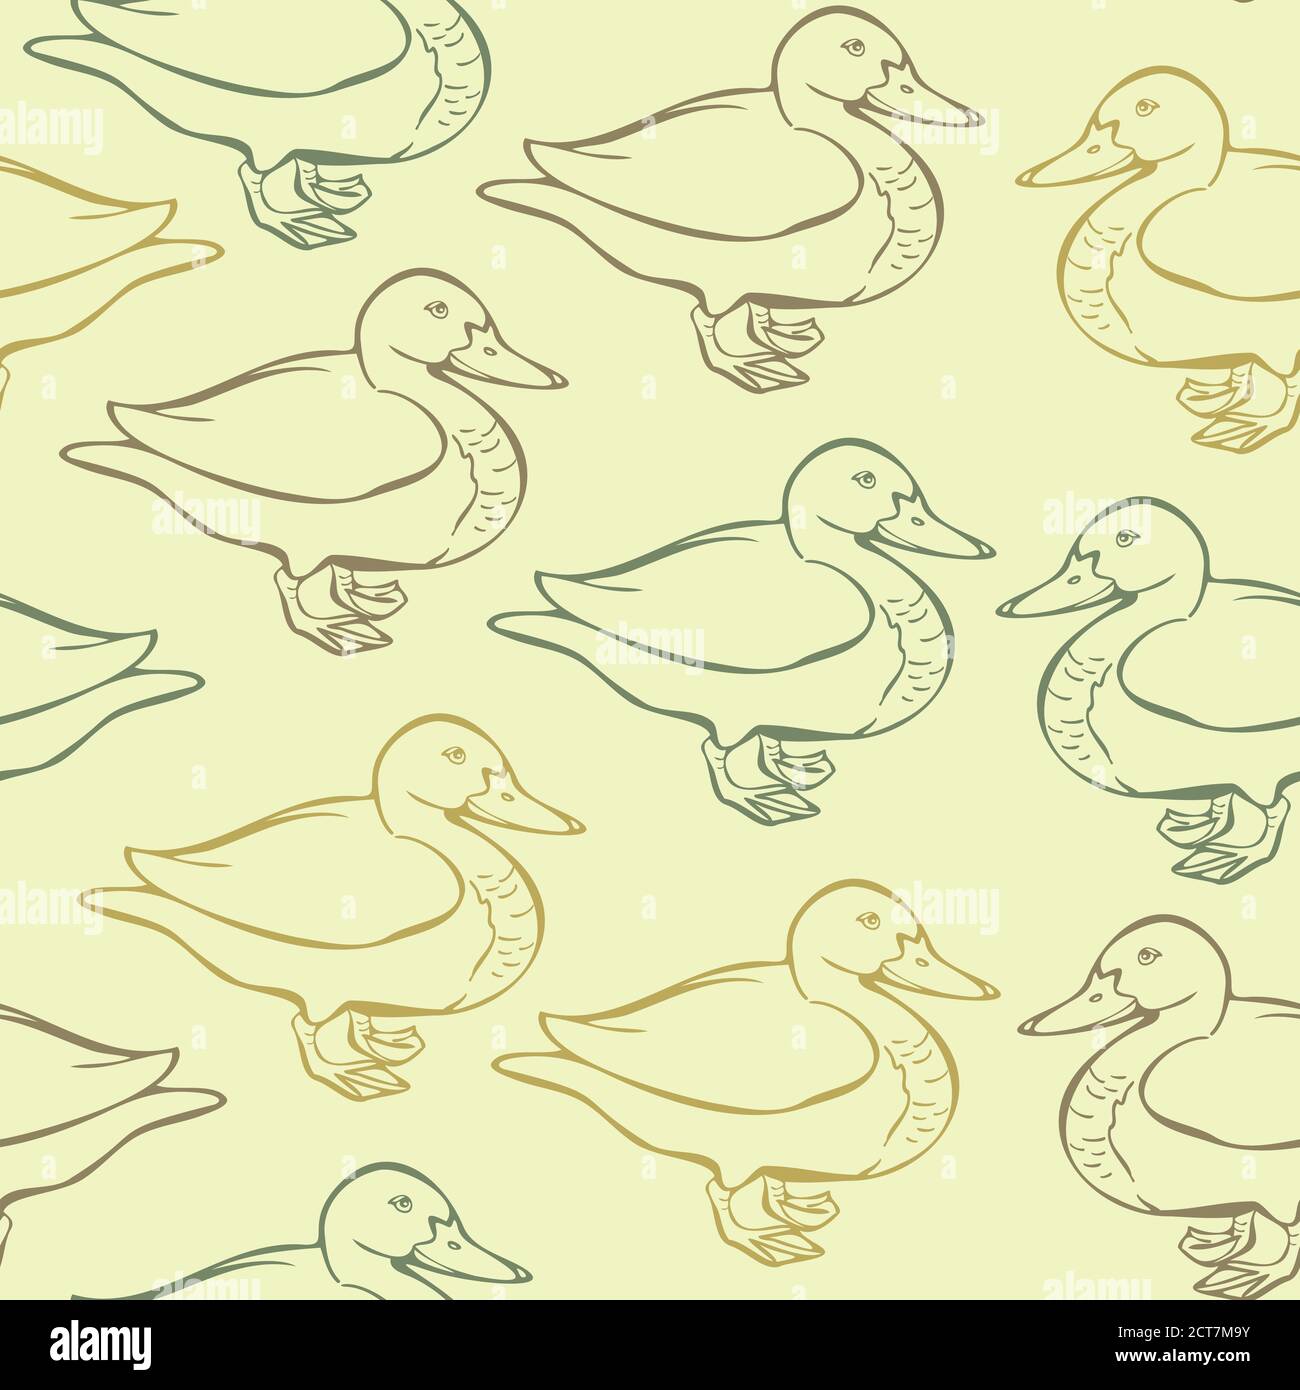 Vector seamless pattern of ducks on a light-yellow background. Wallpaper with ducks concept design. Stock Vector